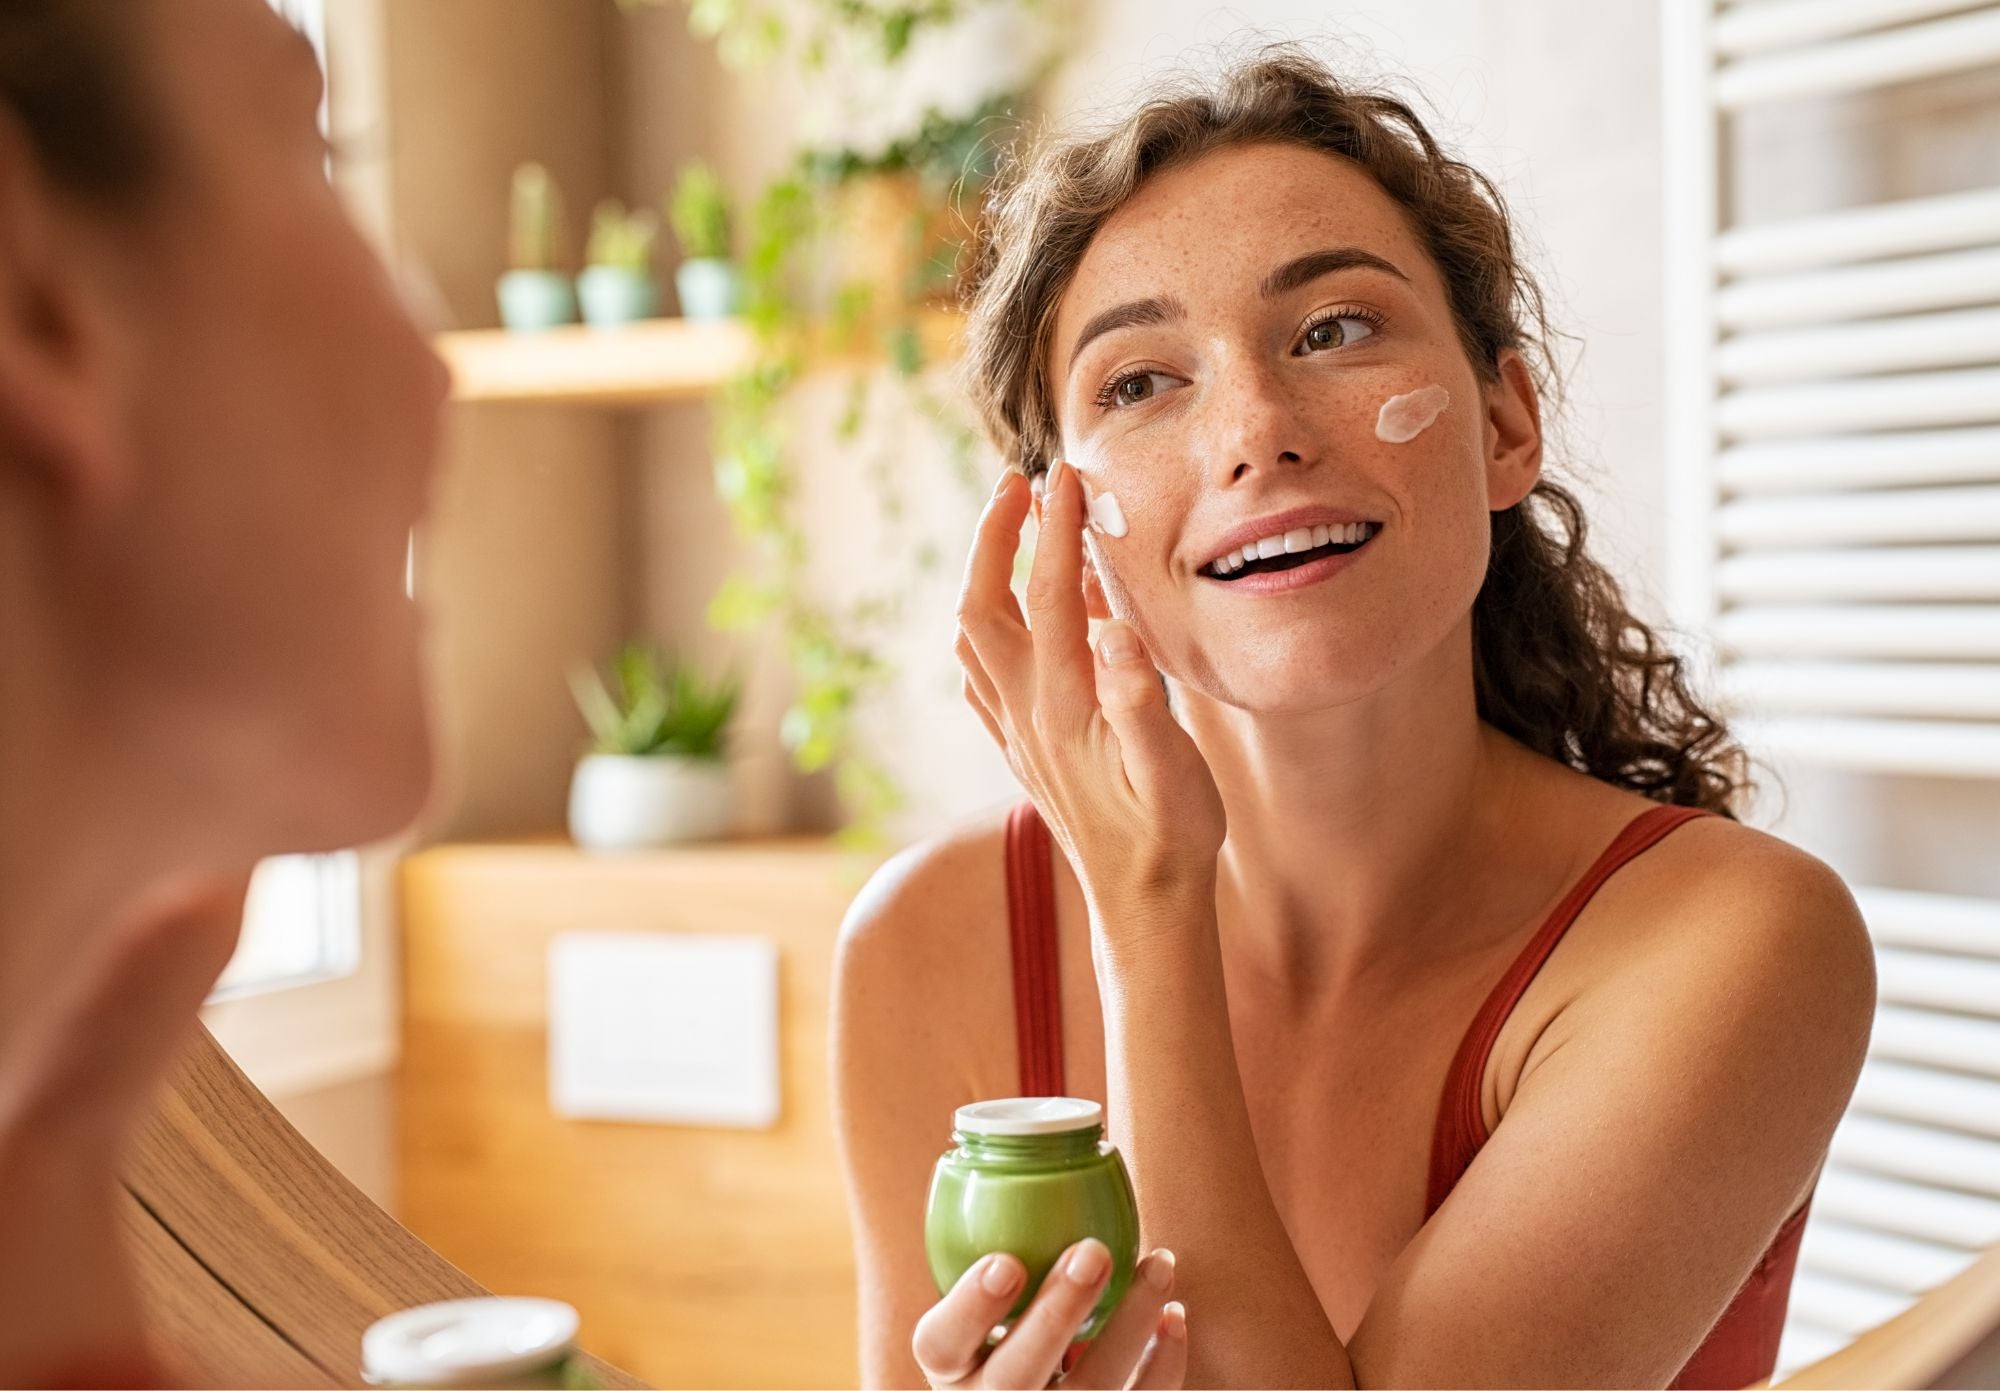 Fresh-Faced Beauty: Daily Skincare Rituals for a Youthful Look